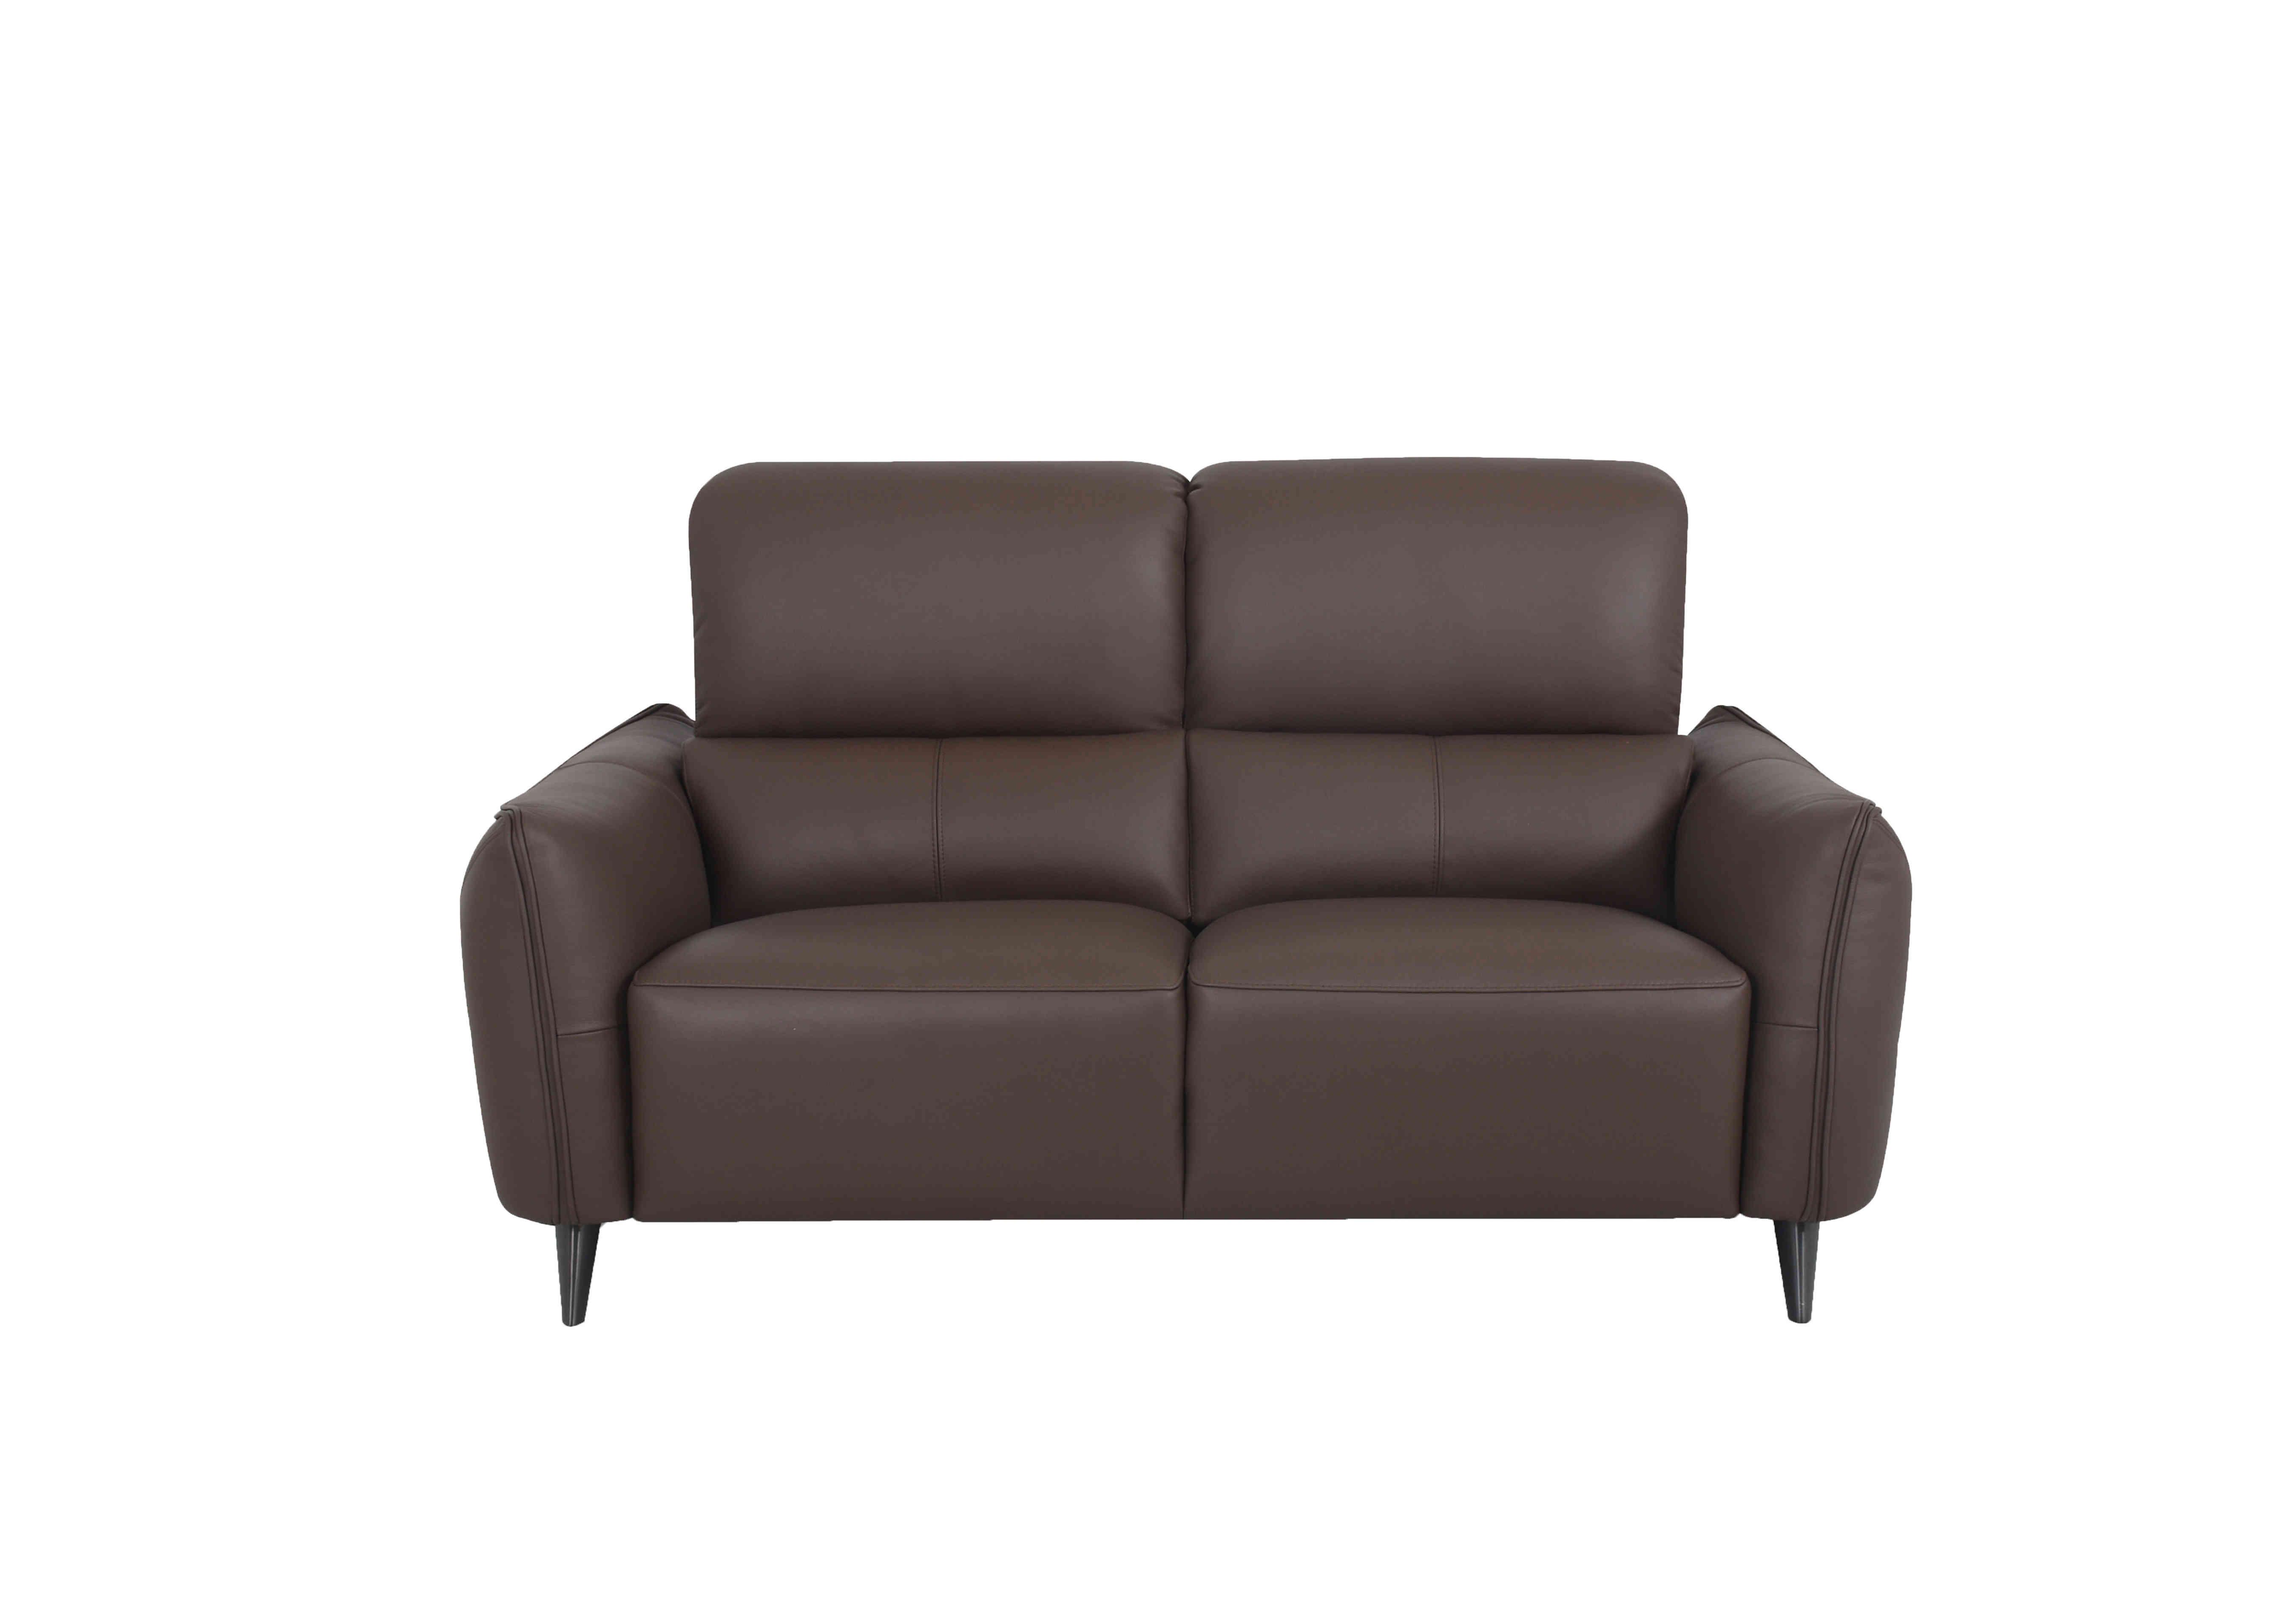 Maddox 2.5 Seater Leather Sofa in Nn-512e Cacao Brown on Furniture Village